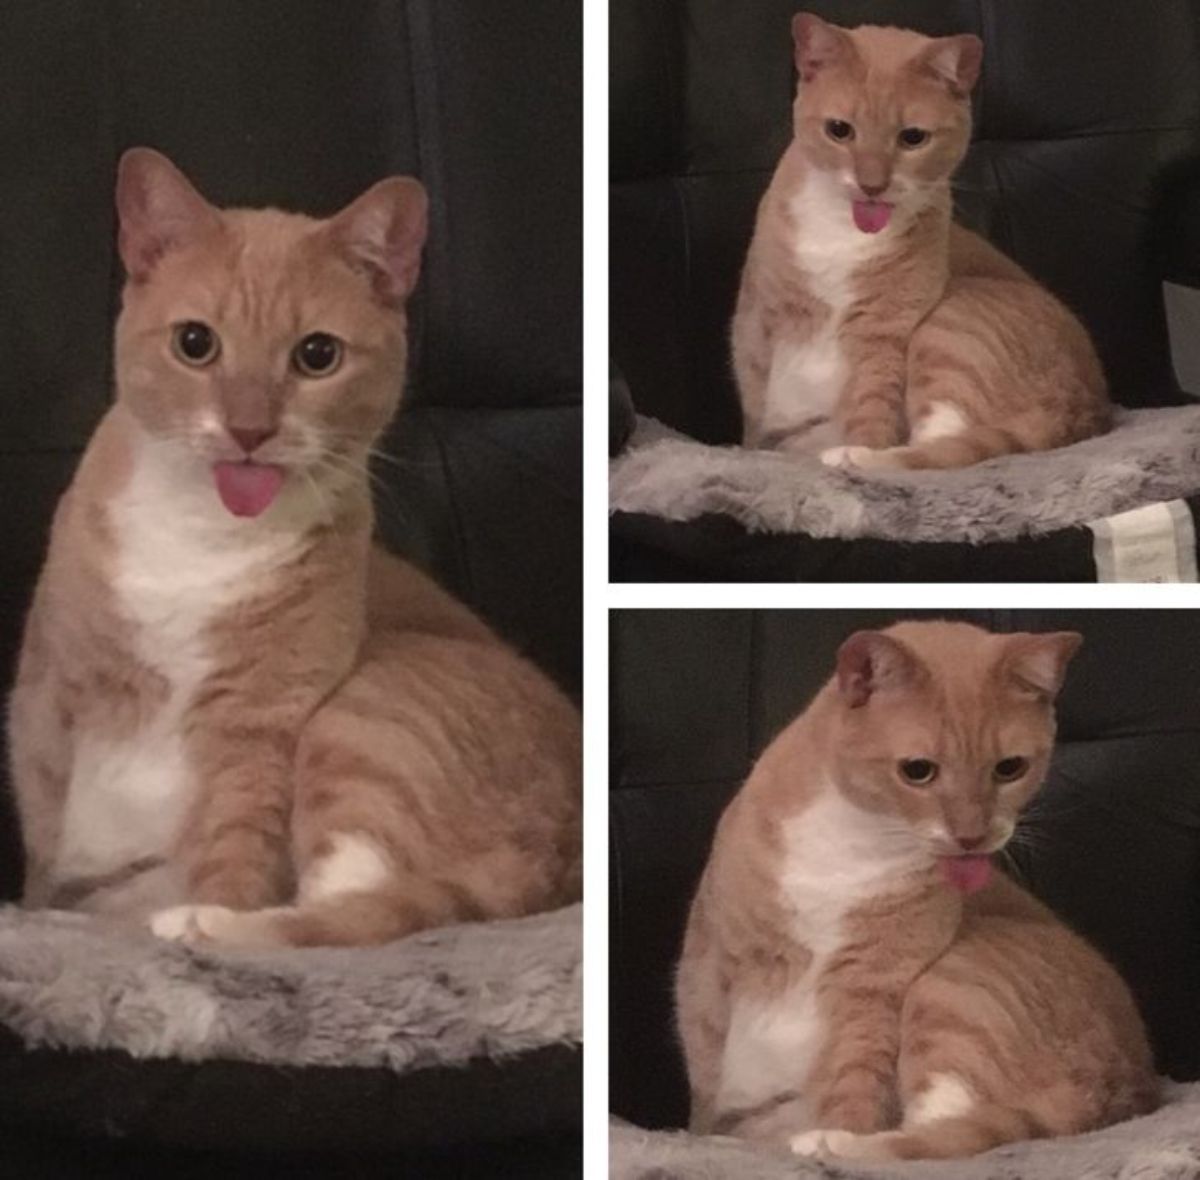 3 photos of an orange and white cat sitting on a grey bed with its tongue out